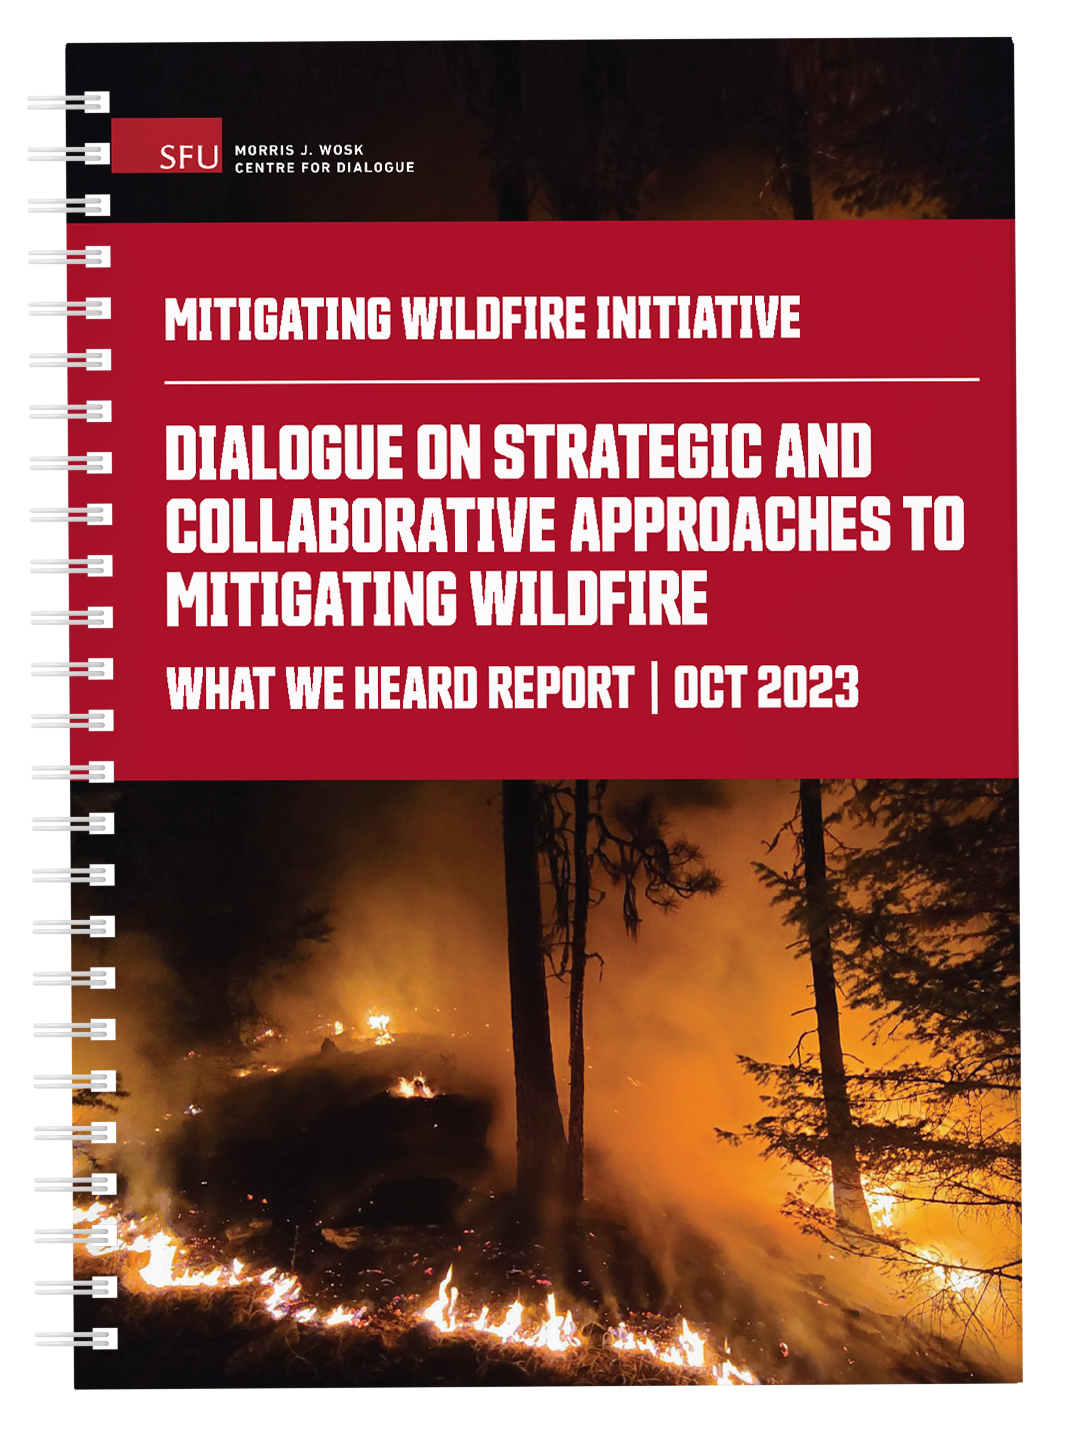 Mockup of the cover of the what we heard report for the dialogue on strategic and collaborative approaches to mitigating wildfire